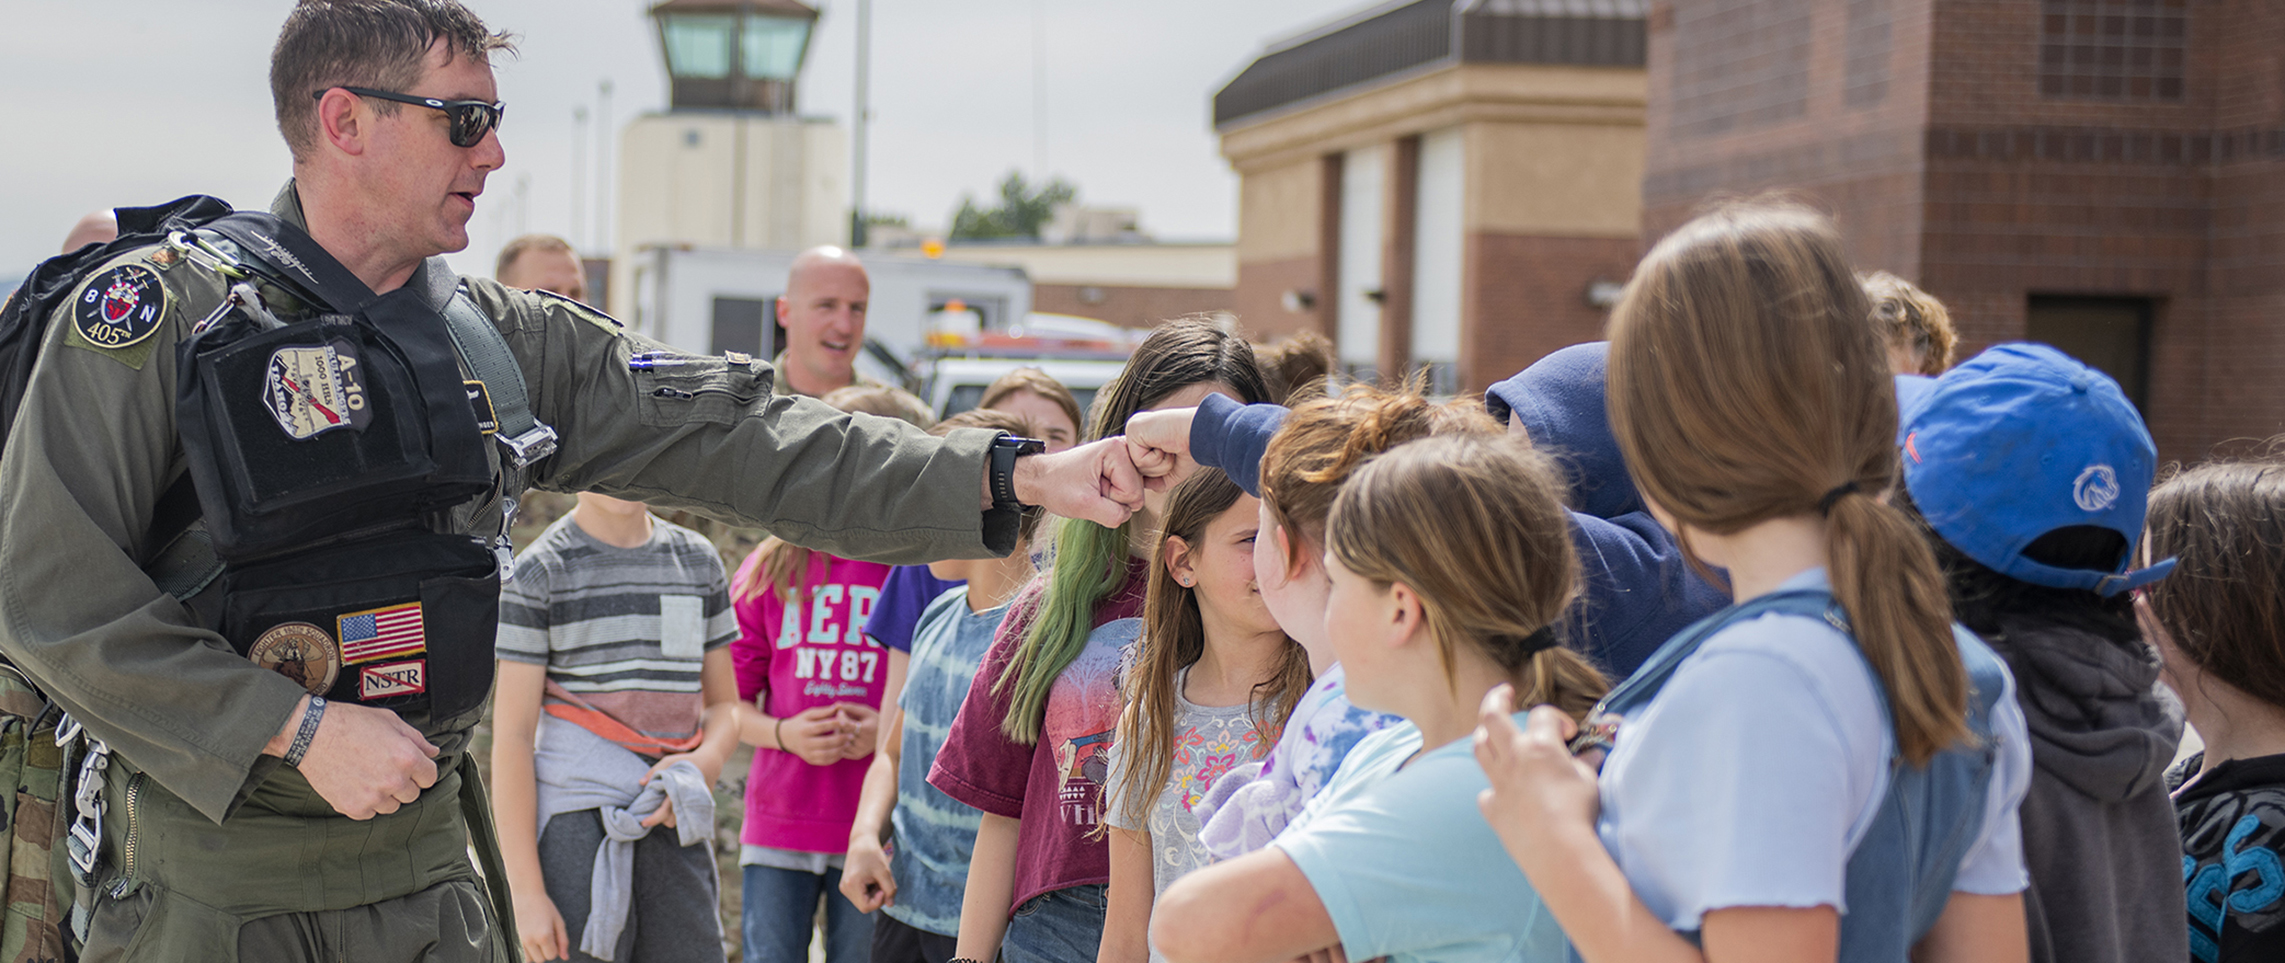 Idaho National Guard conducts more than 300 community relations events each year.